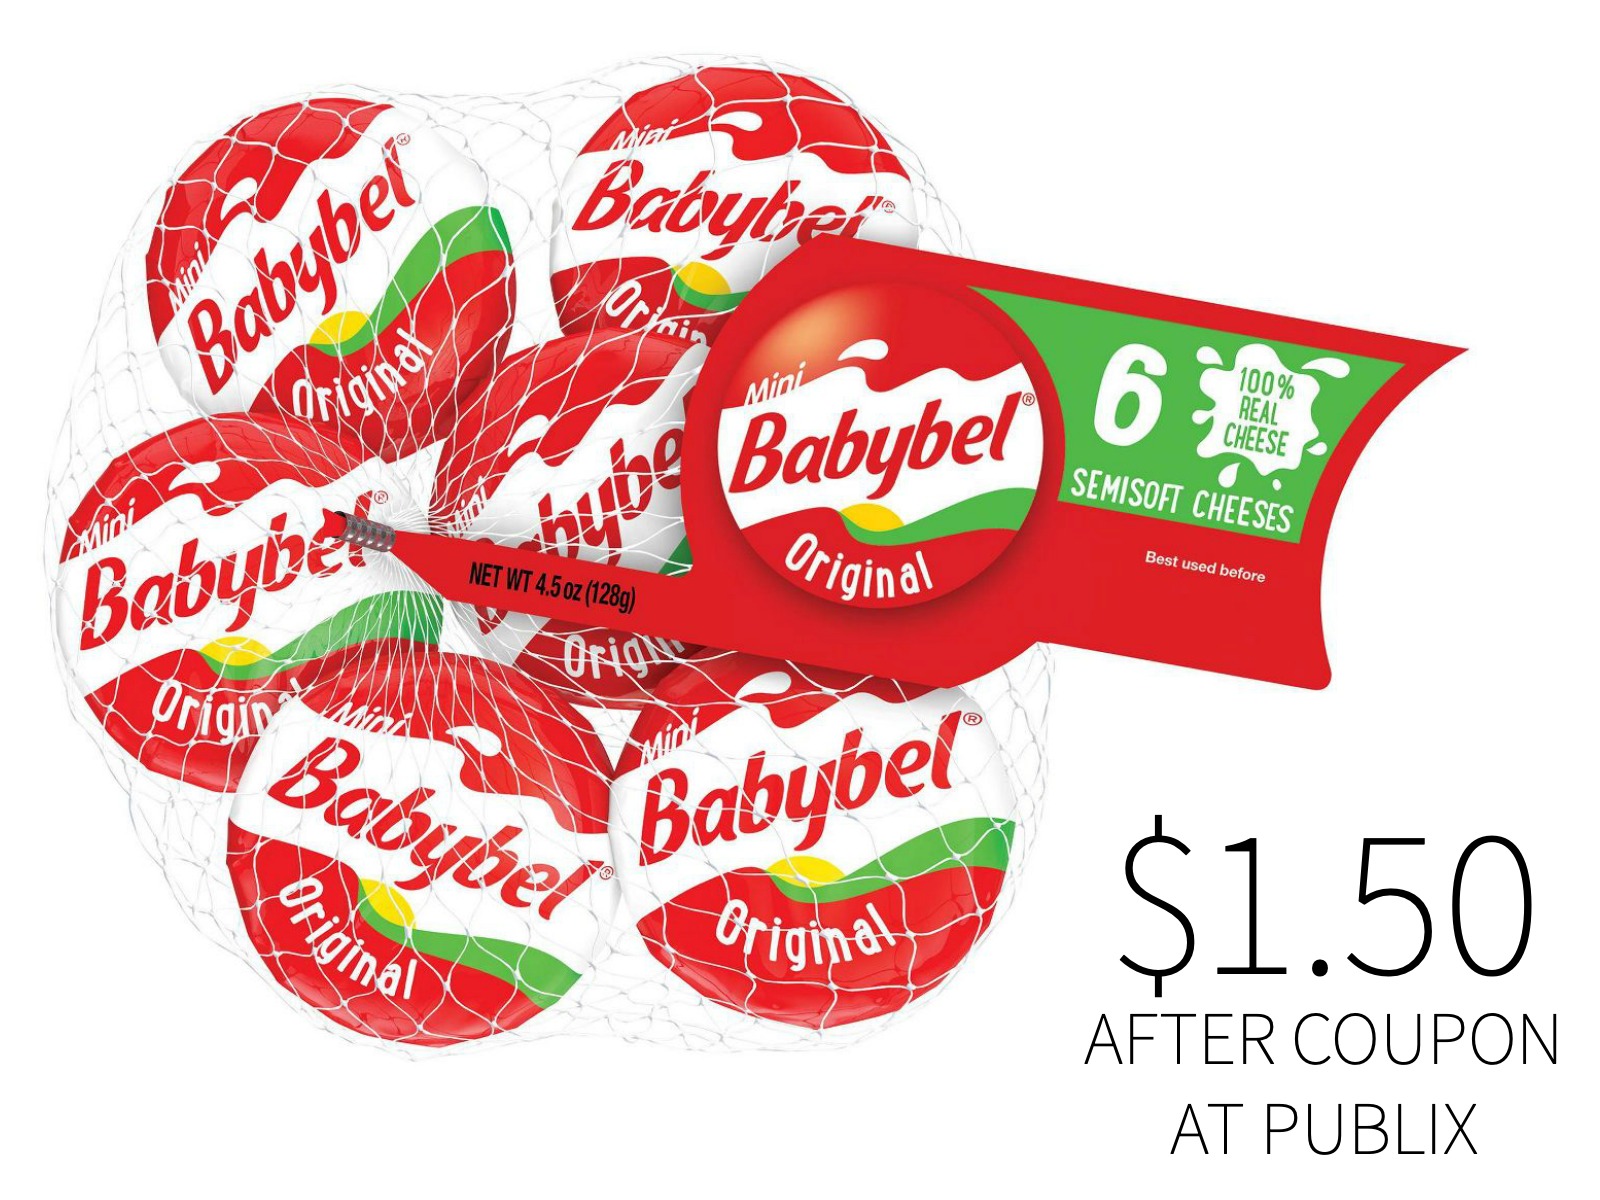 The Laughing Cow Mini Babybel Cheese Just $1.50 At Publix on I Heart Publix